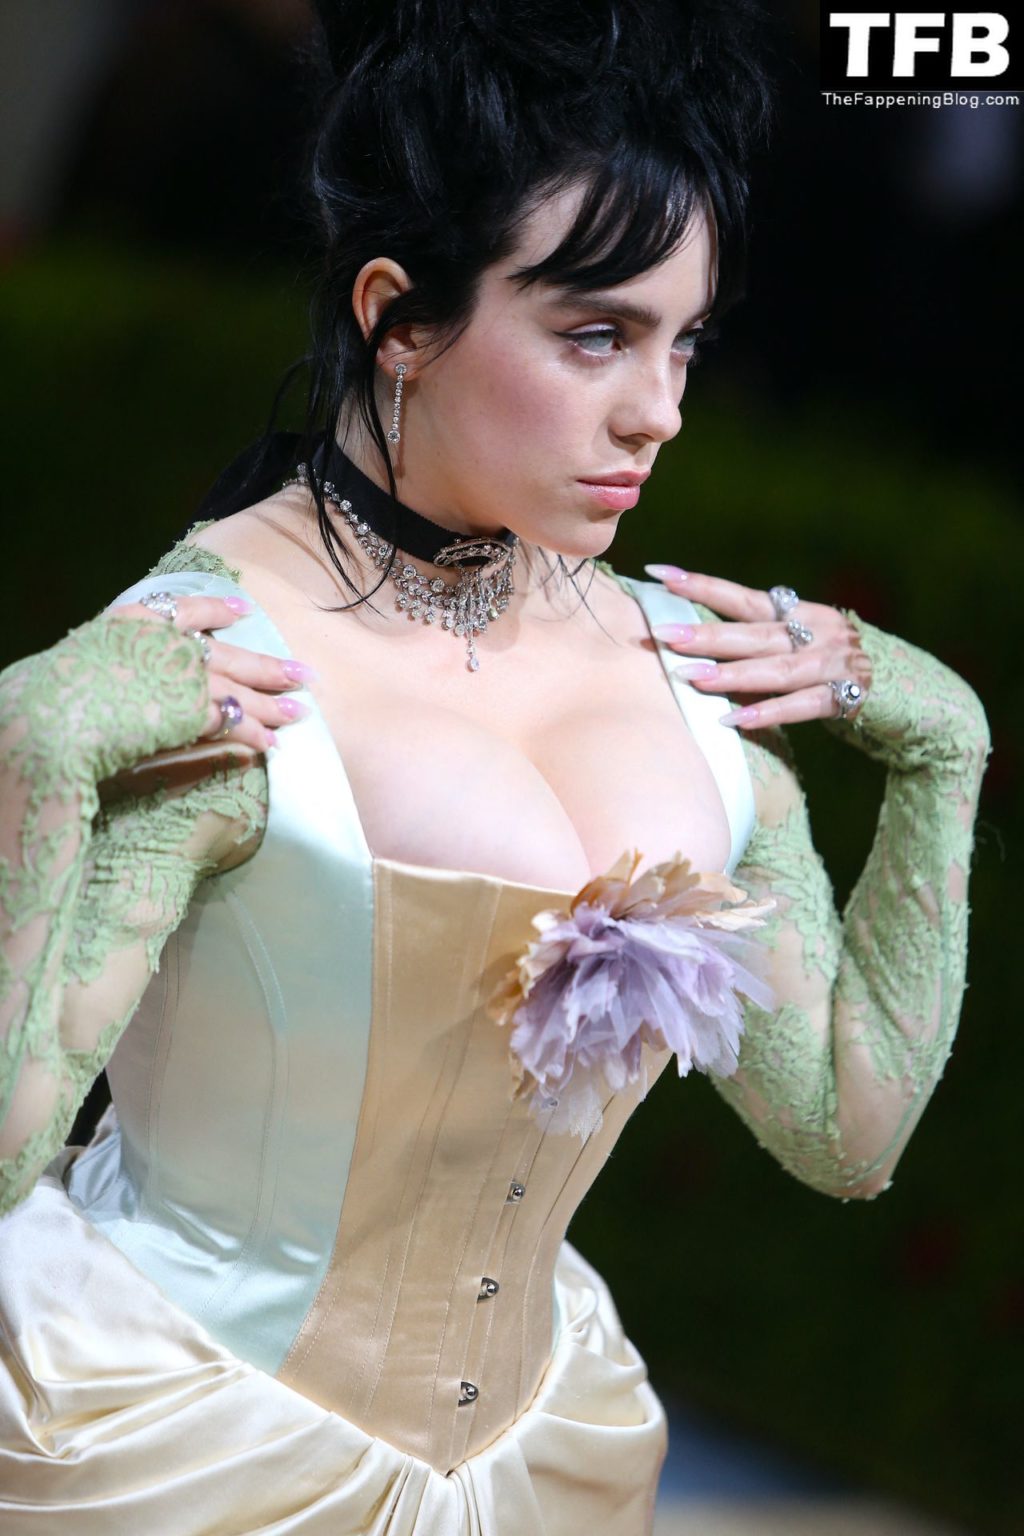 Billie Eilish Sexy The Fappening Blog 13 1024x1536 - Billie Eilish Showcases Nice Cleavage at The 2022 Met Gala in NYC (155 Photos)